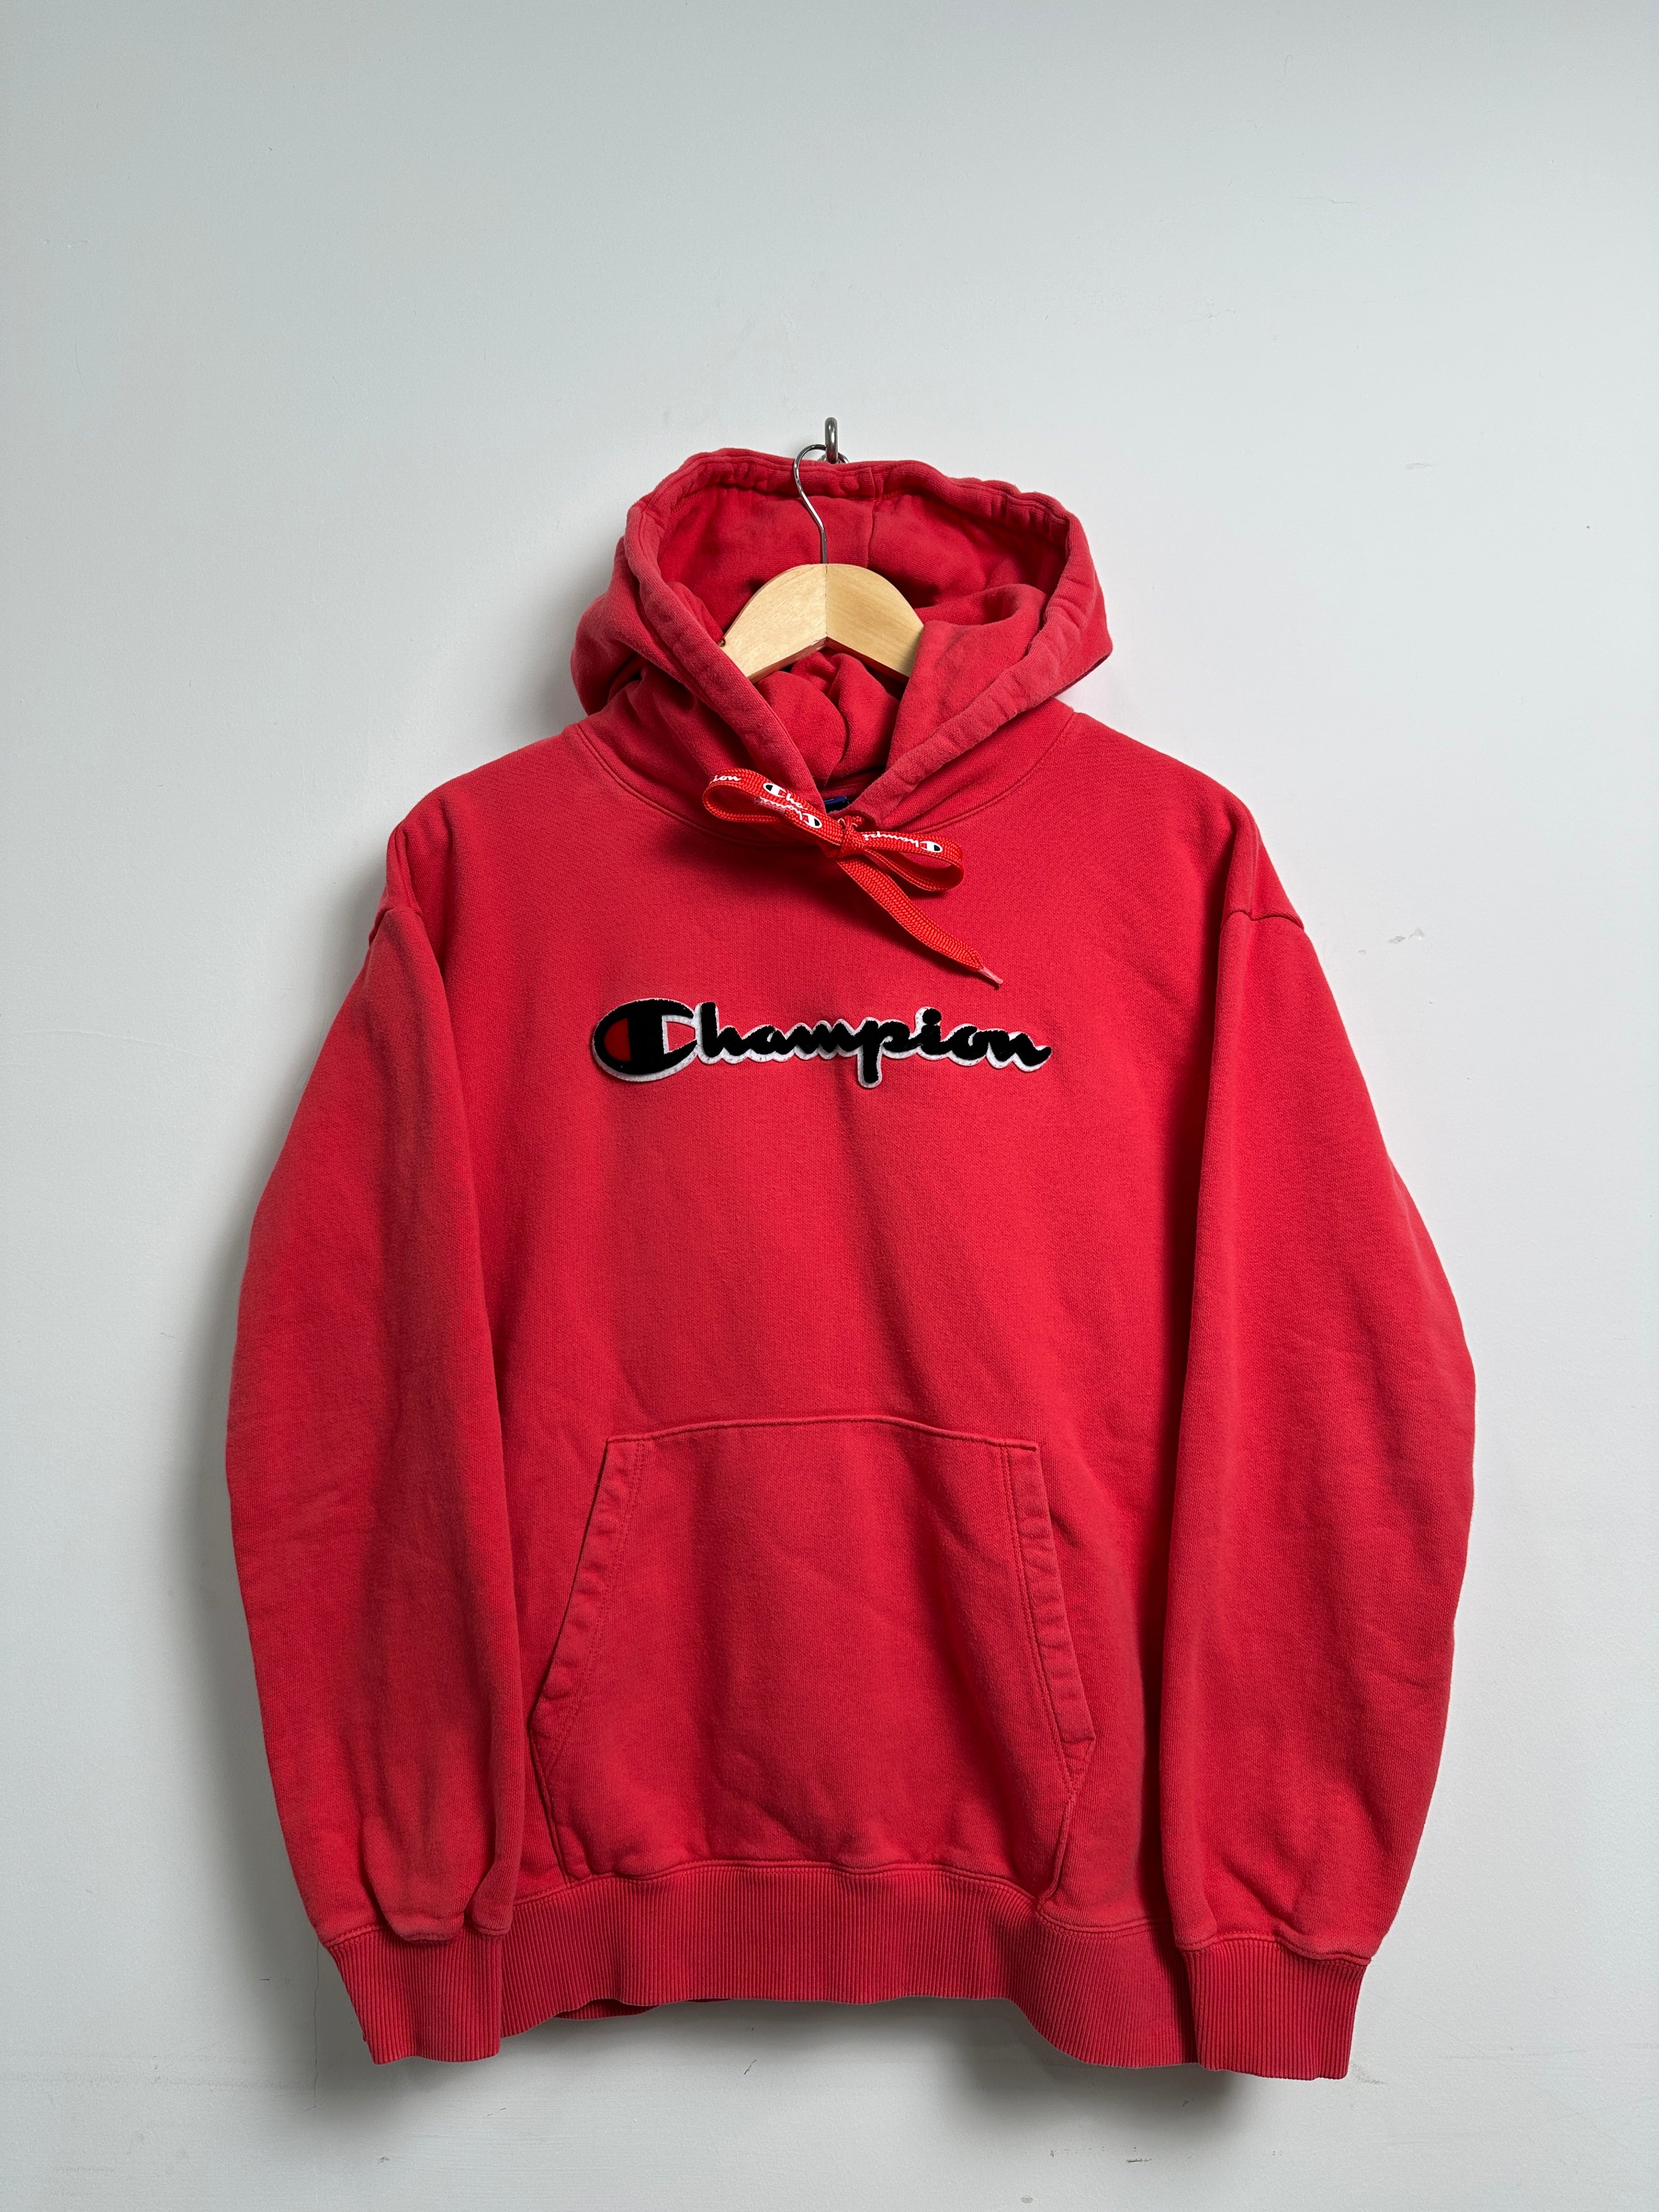 CHAMPION hoodie in red with black spellout logo